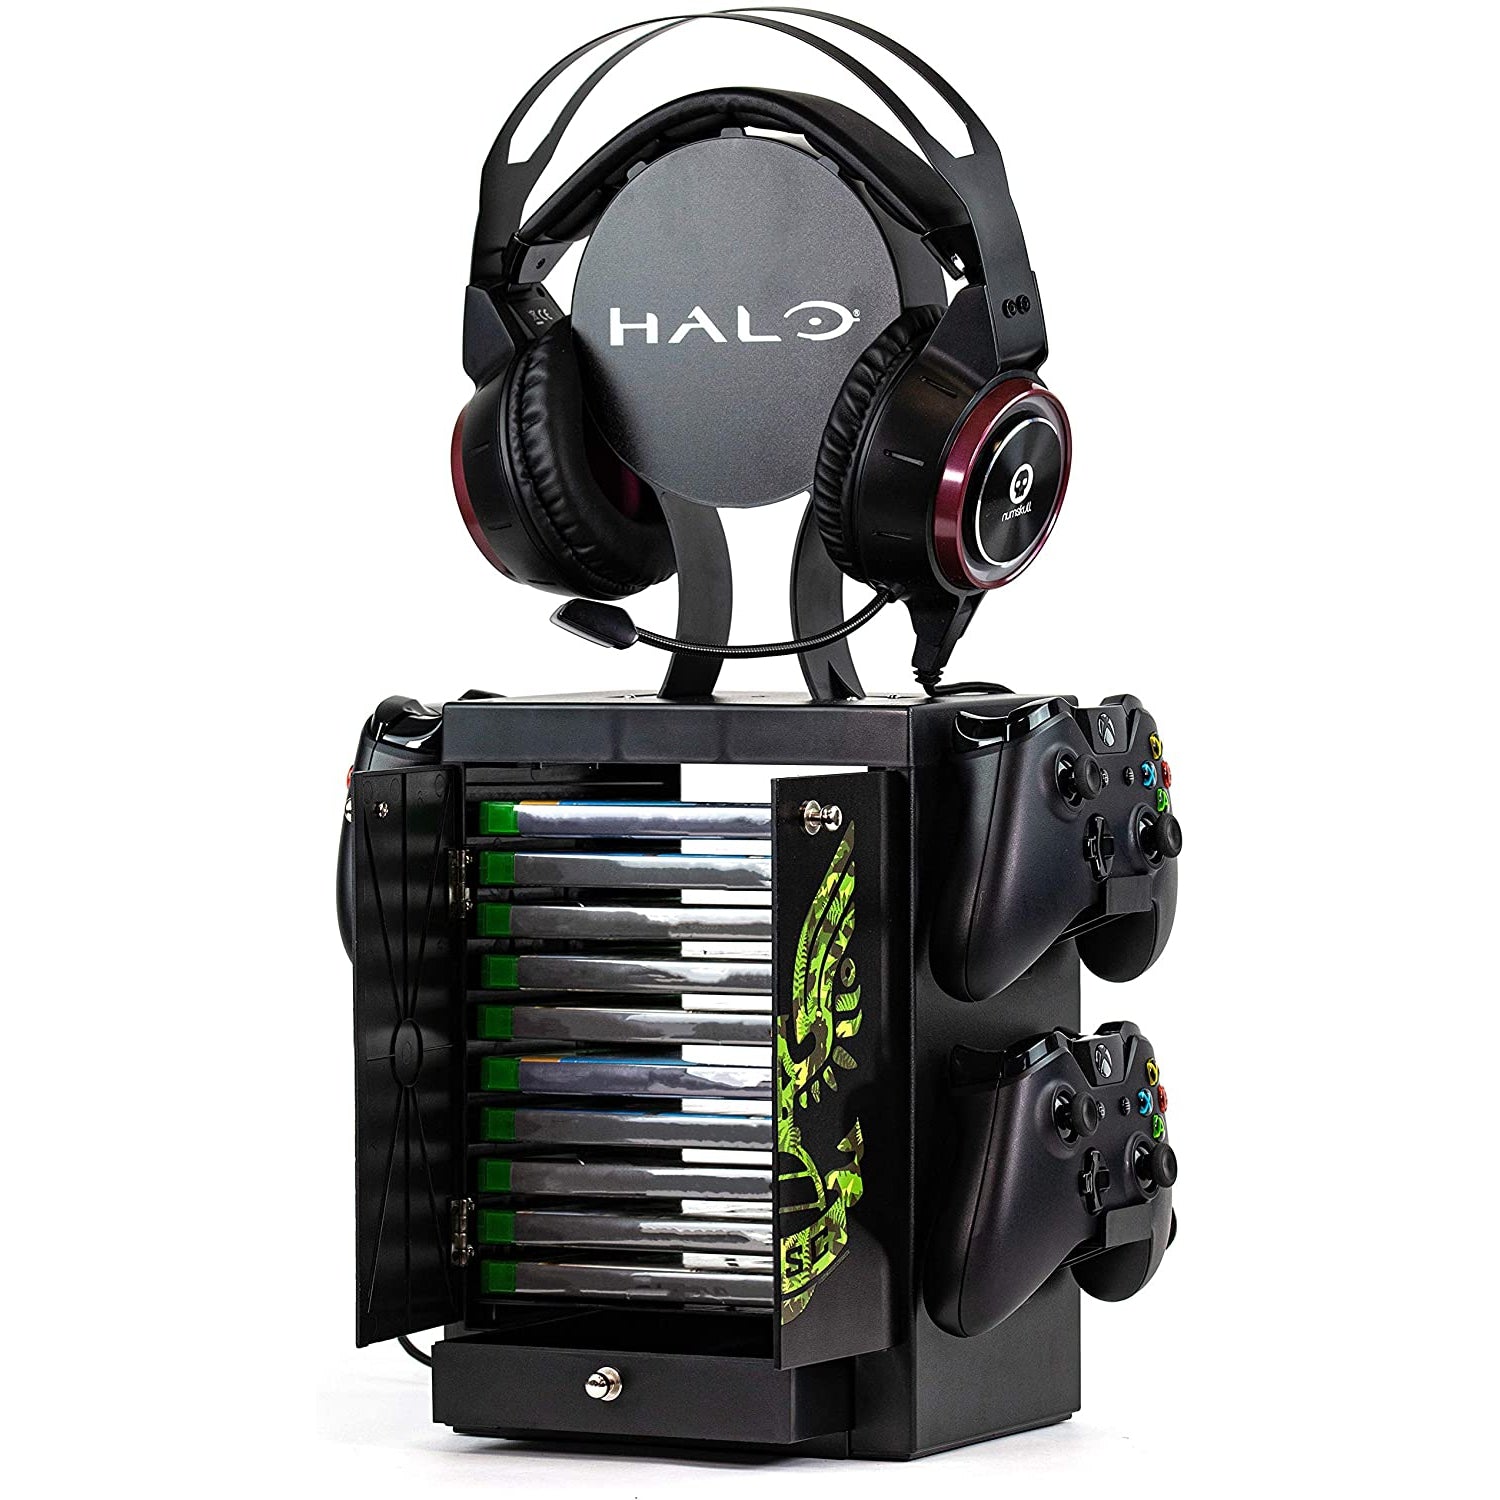 Numskull Official Halo Game Storage Tower, Controller Holder, Headset Stand